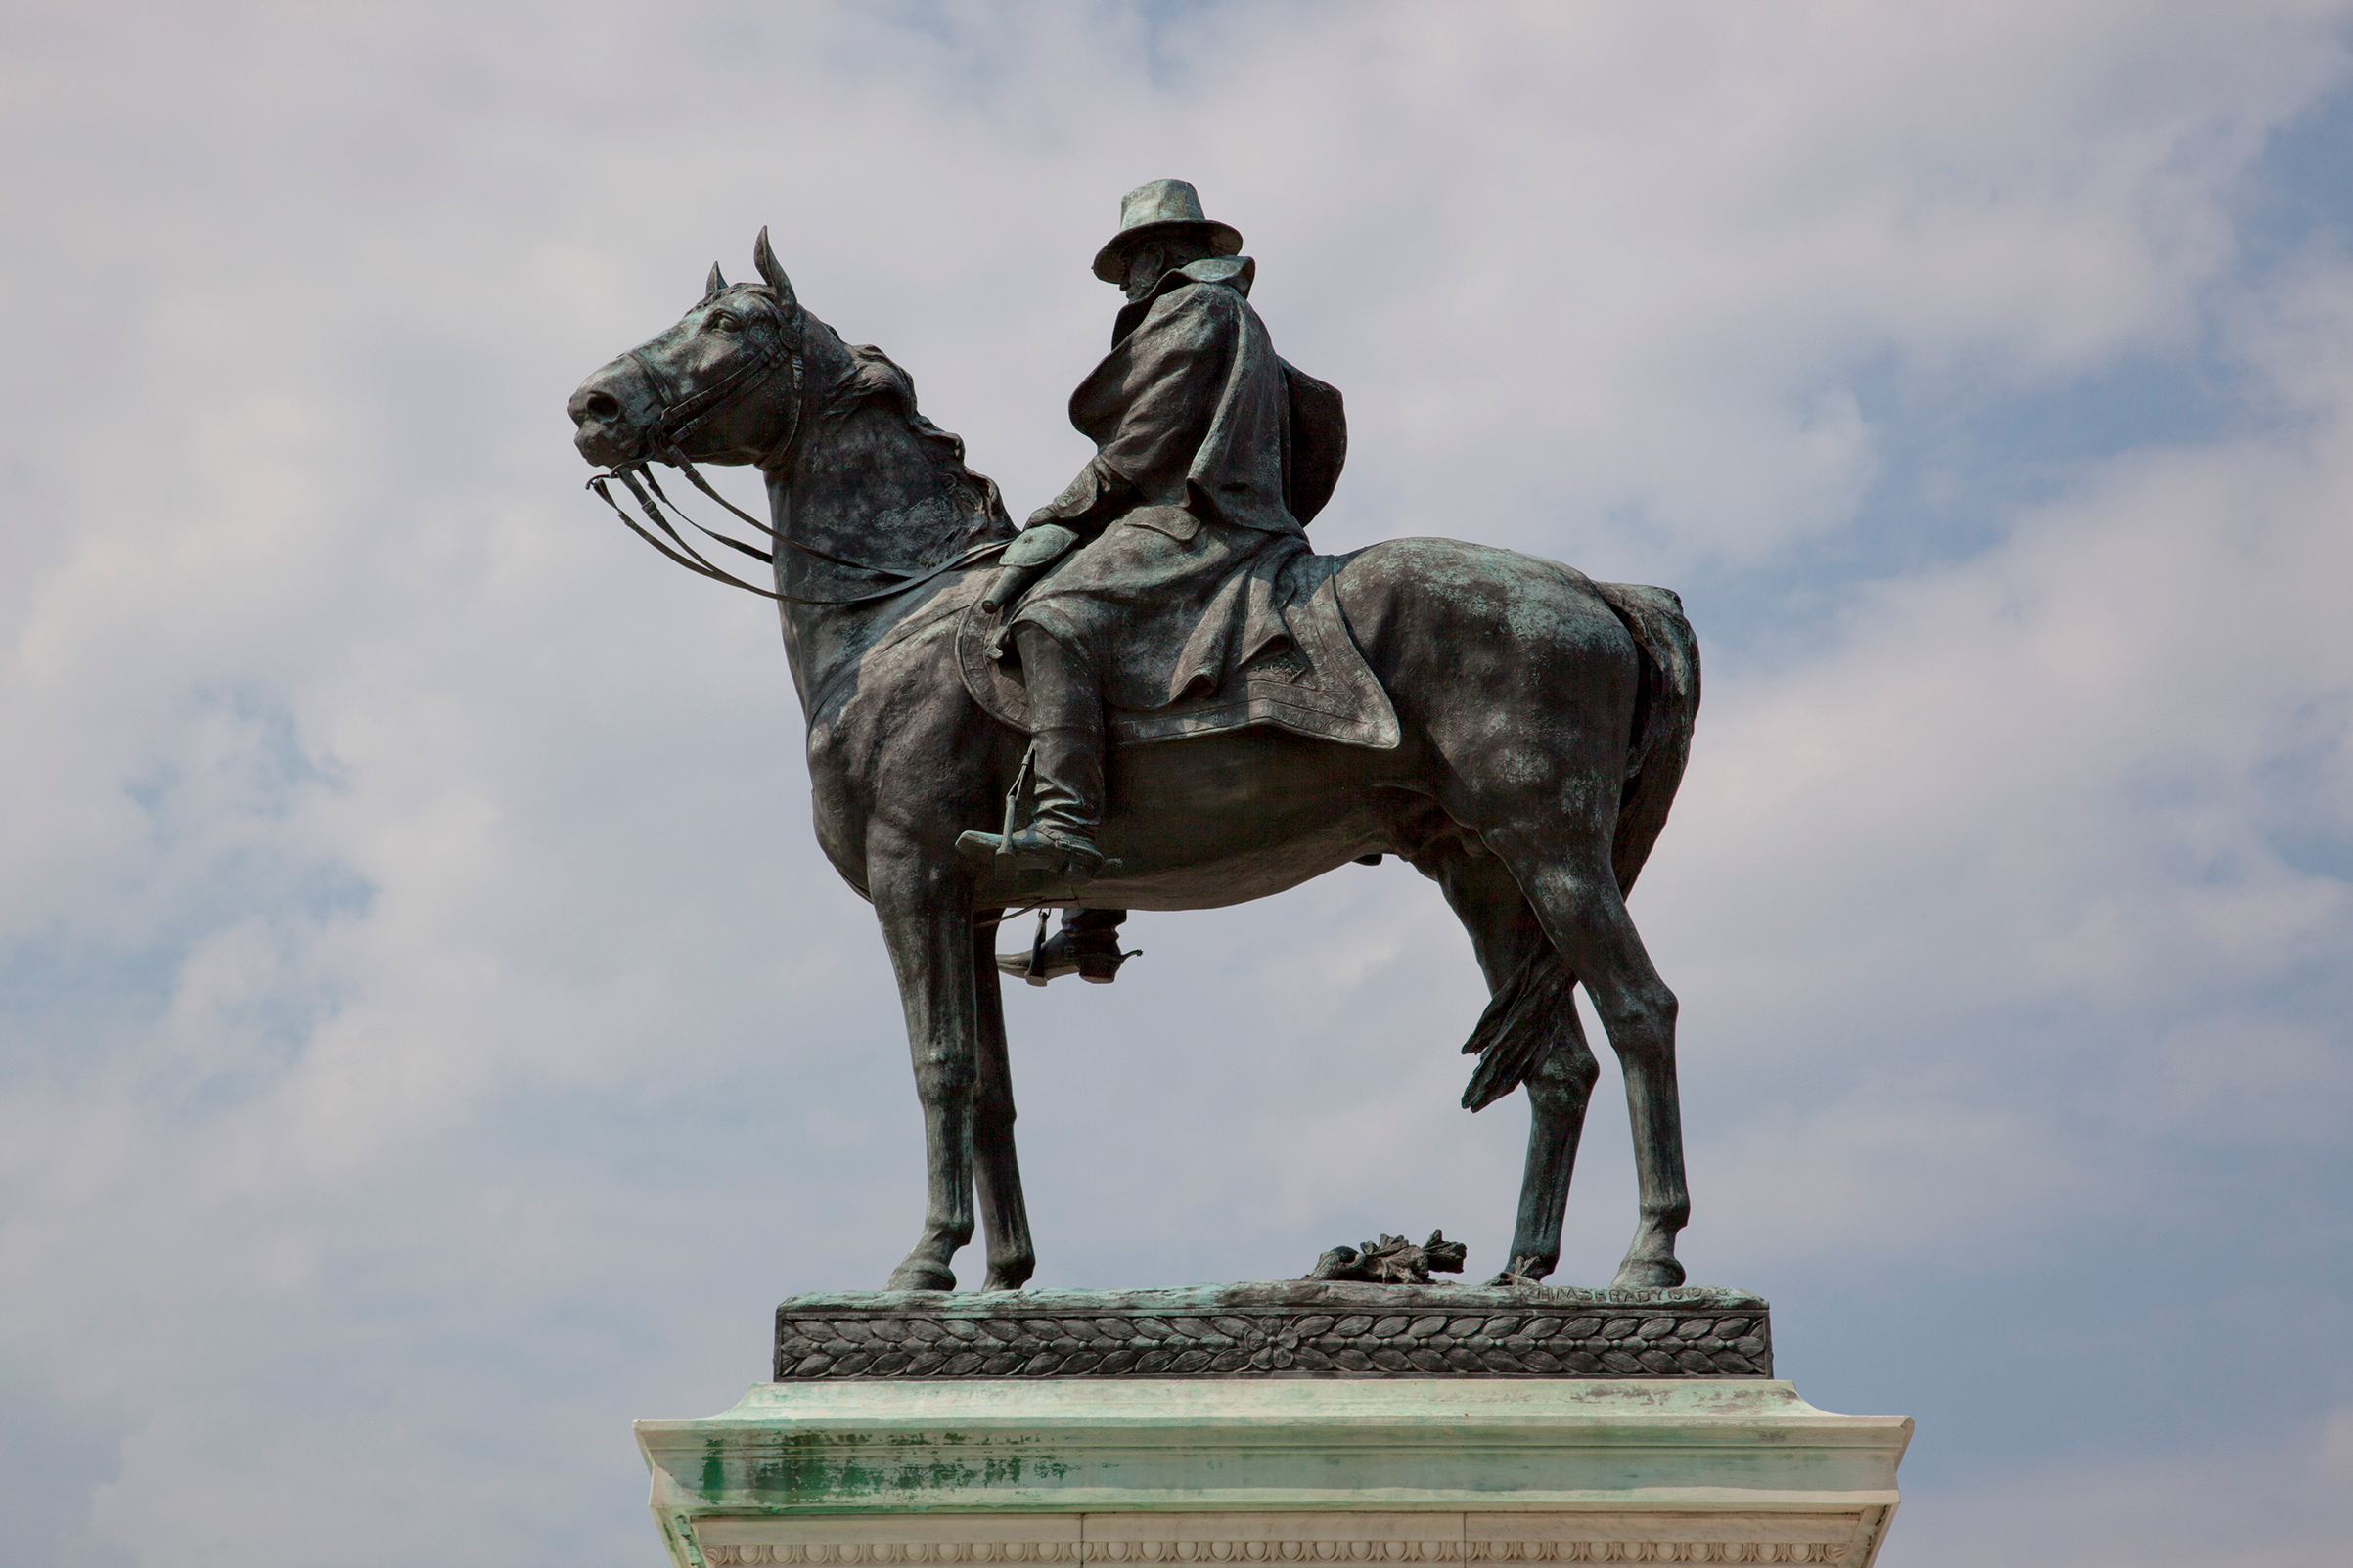 The Ulysses S. Grant Memorial in Washington, D.C. (Carol M. Highsmith—Buyenlarge/Getty Images)